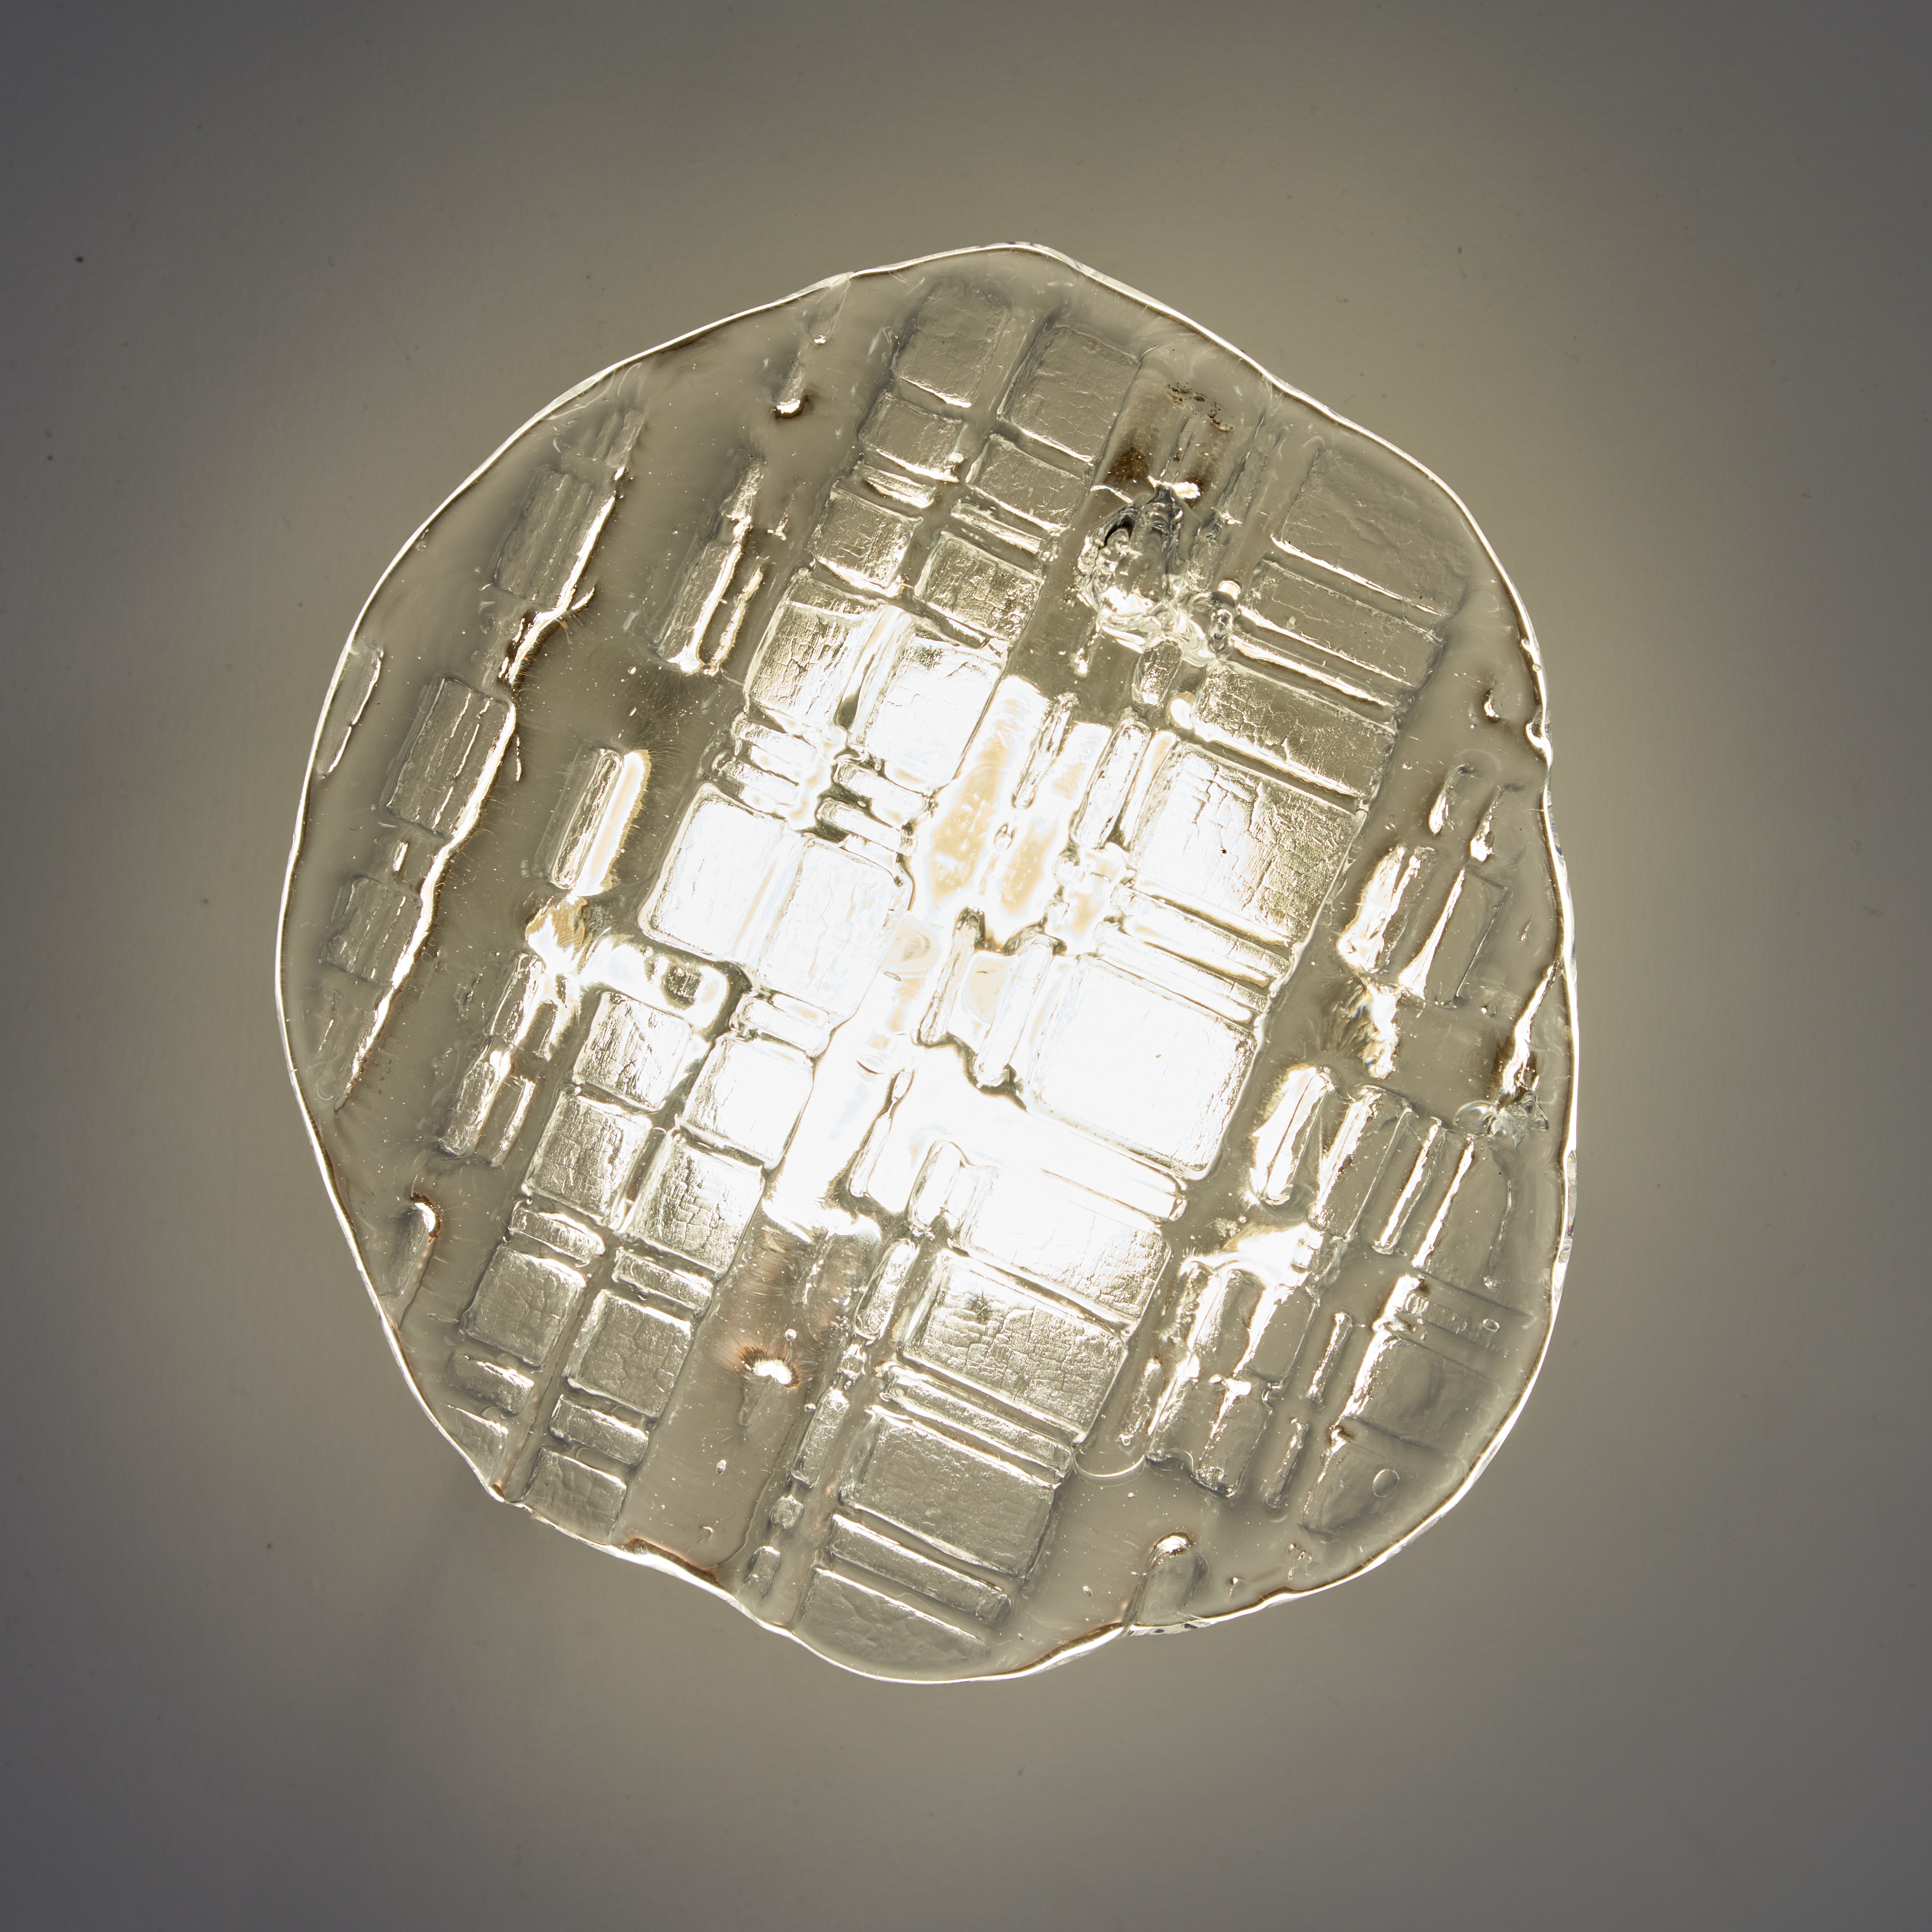 /Wall%20sconce%20made%20of%20hot%20casted%20glass%2C%20brass%2C%20plexiglass%20%26%20LED